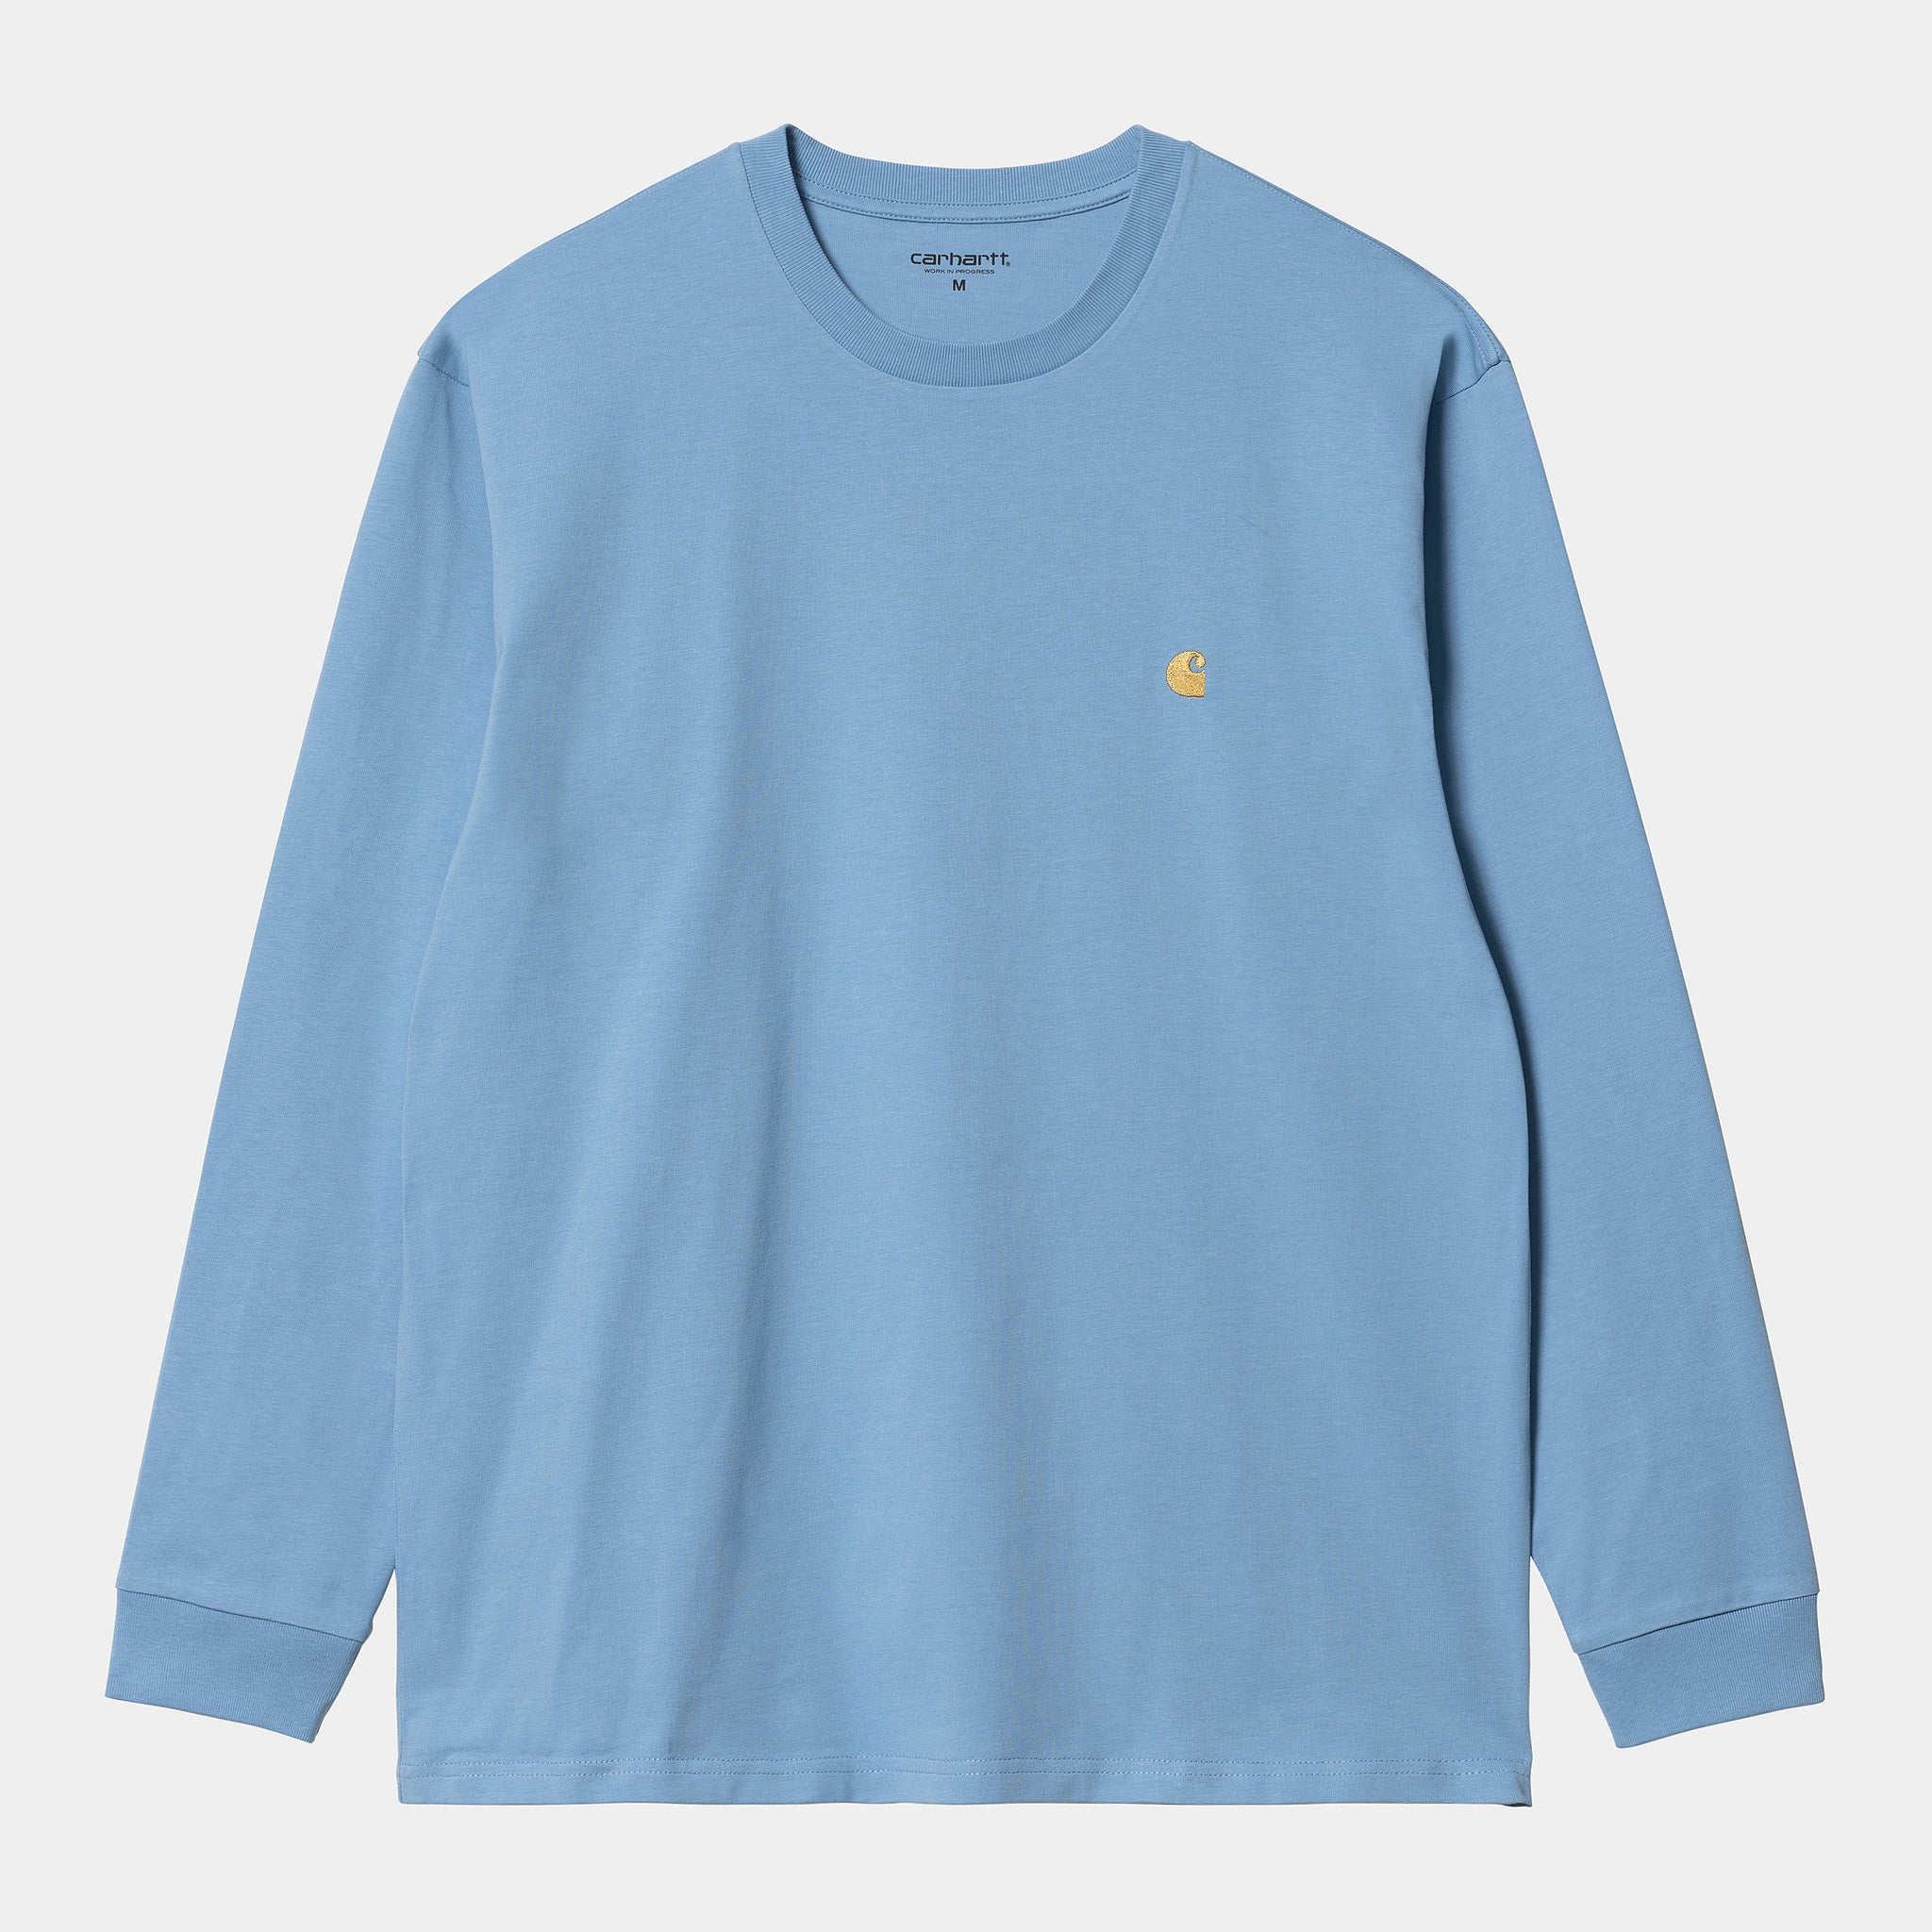 L/s Chase T-shirt 100% Cotton Combed Single Jersey, 235 G/m² (Piscine / Gold)